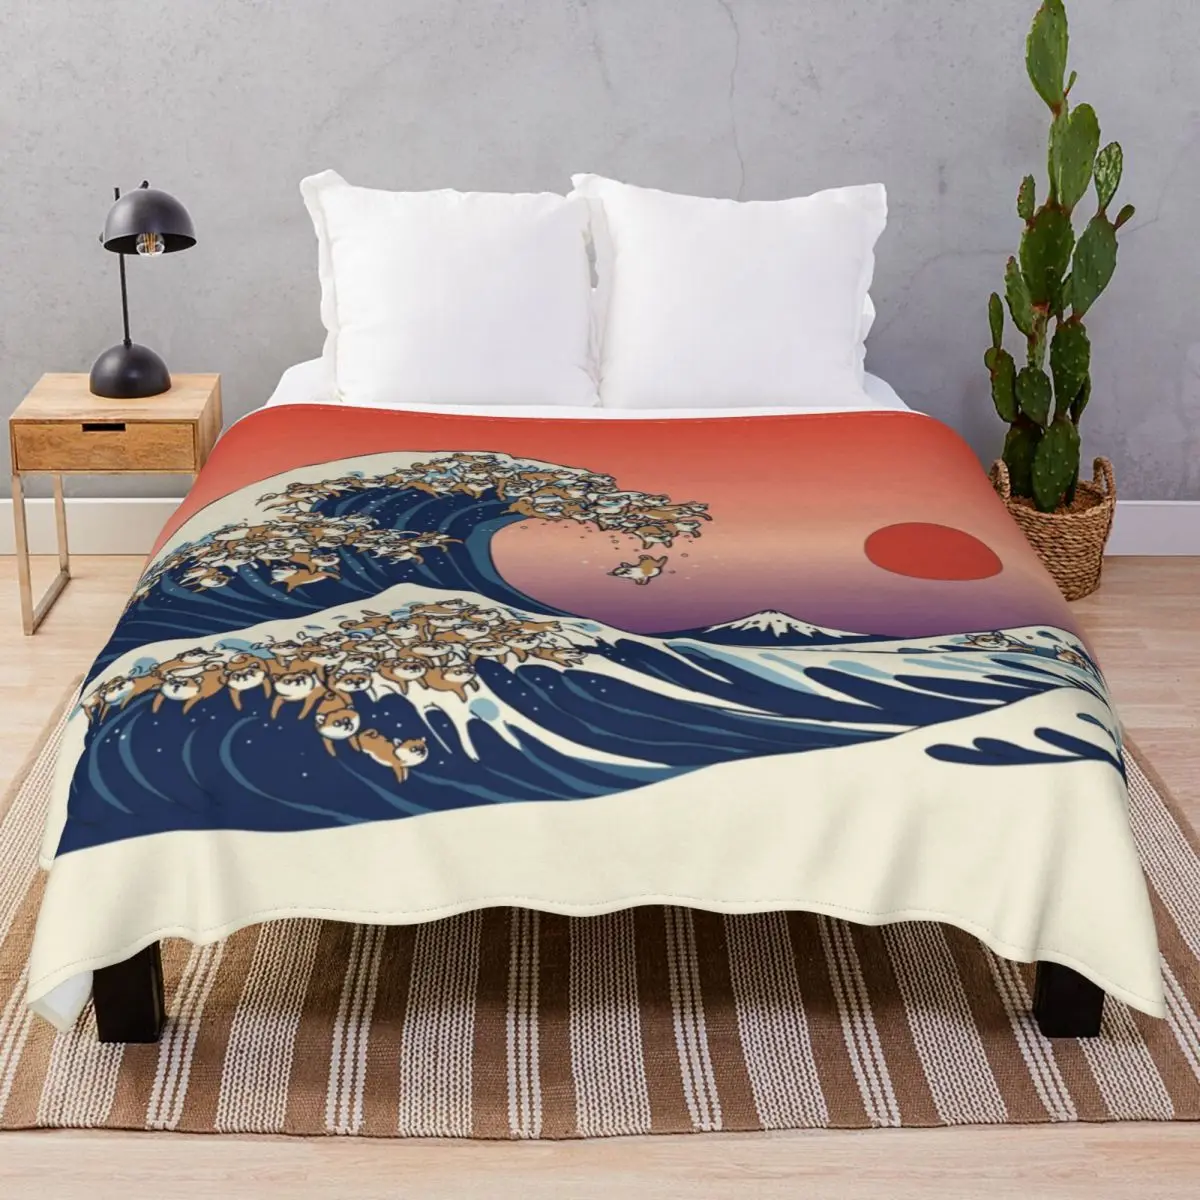 The Great Wave Of Shiba Inu Blanket Fleece Summer Multifunction Throw Blankets for Bed Sofa Camp Office